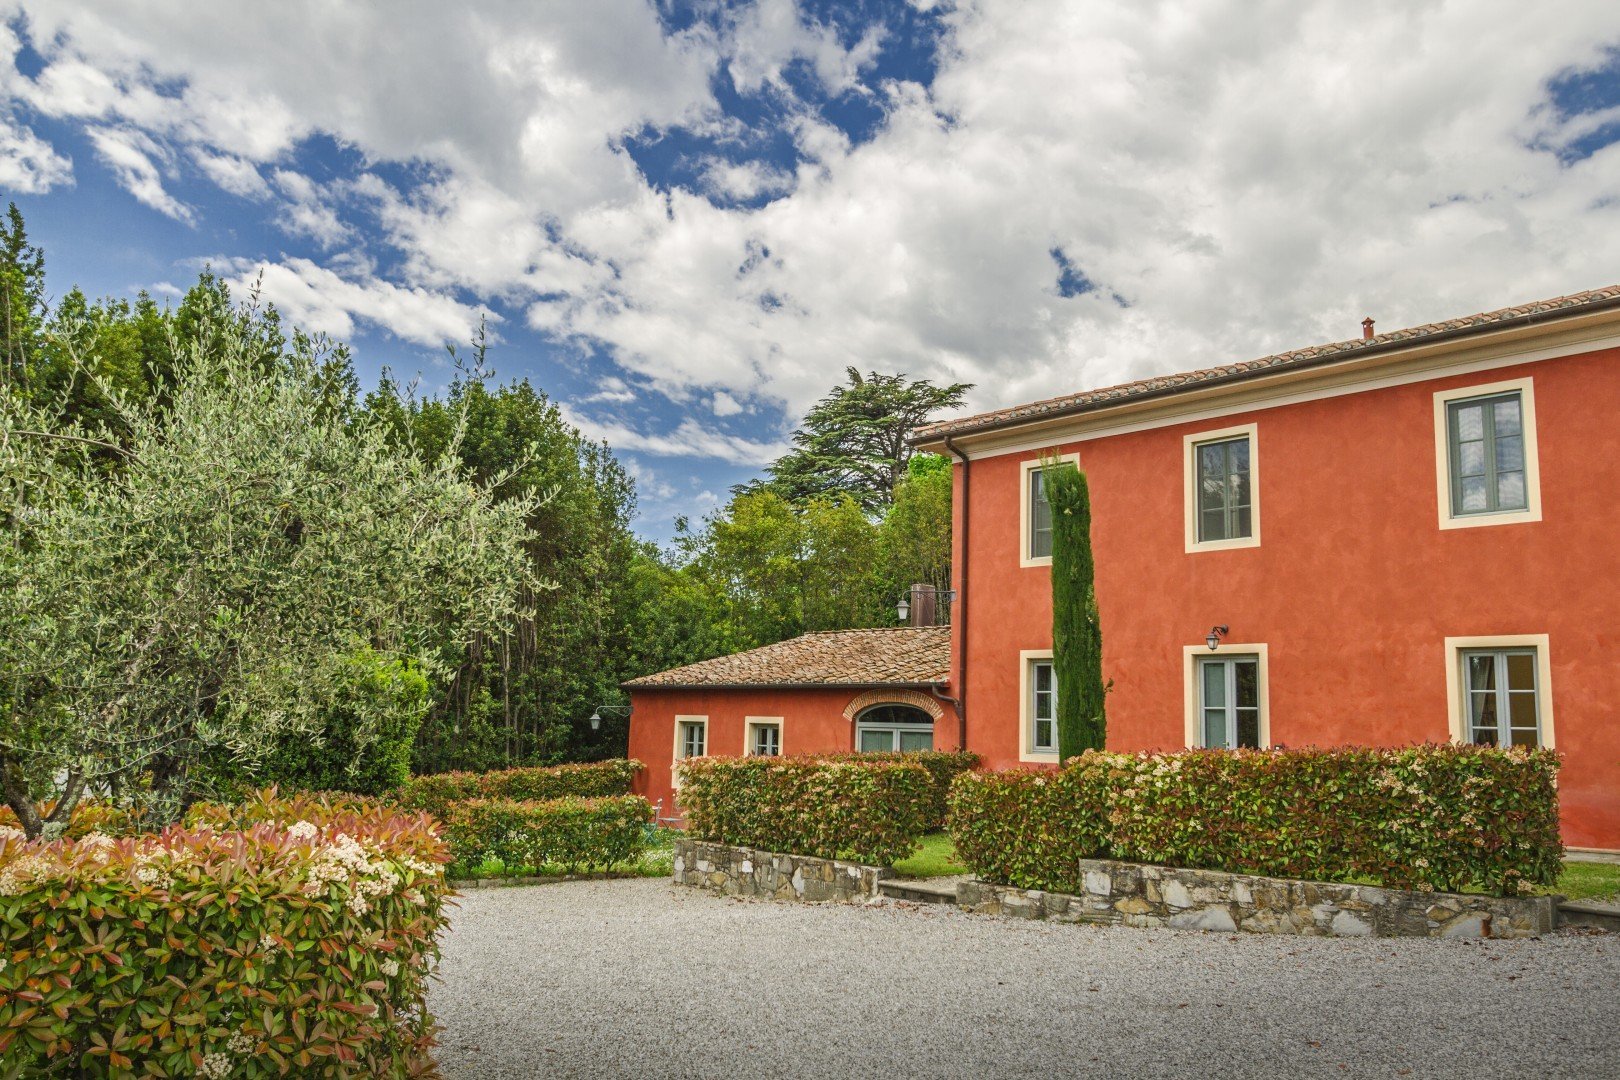 Francis York Boutique Tuscan Hamlet in the Lucca Hills 18.jpg